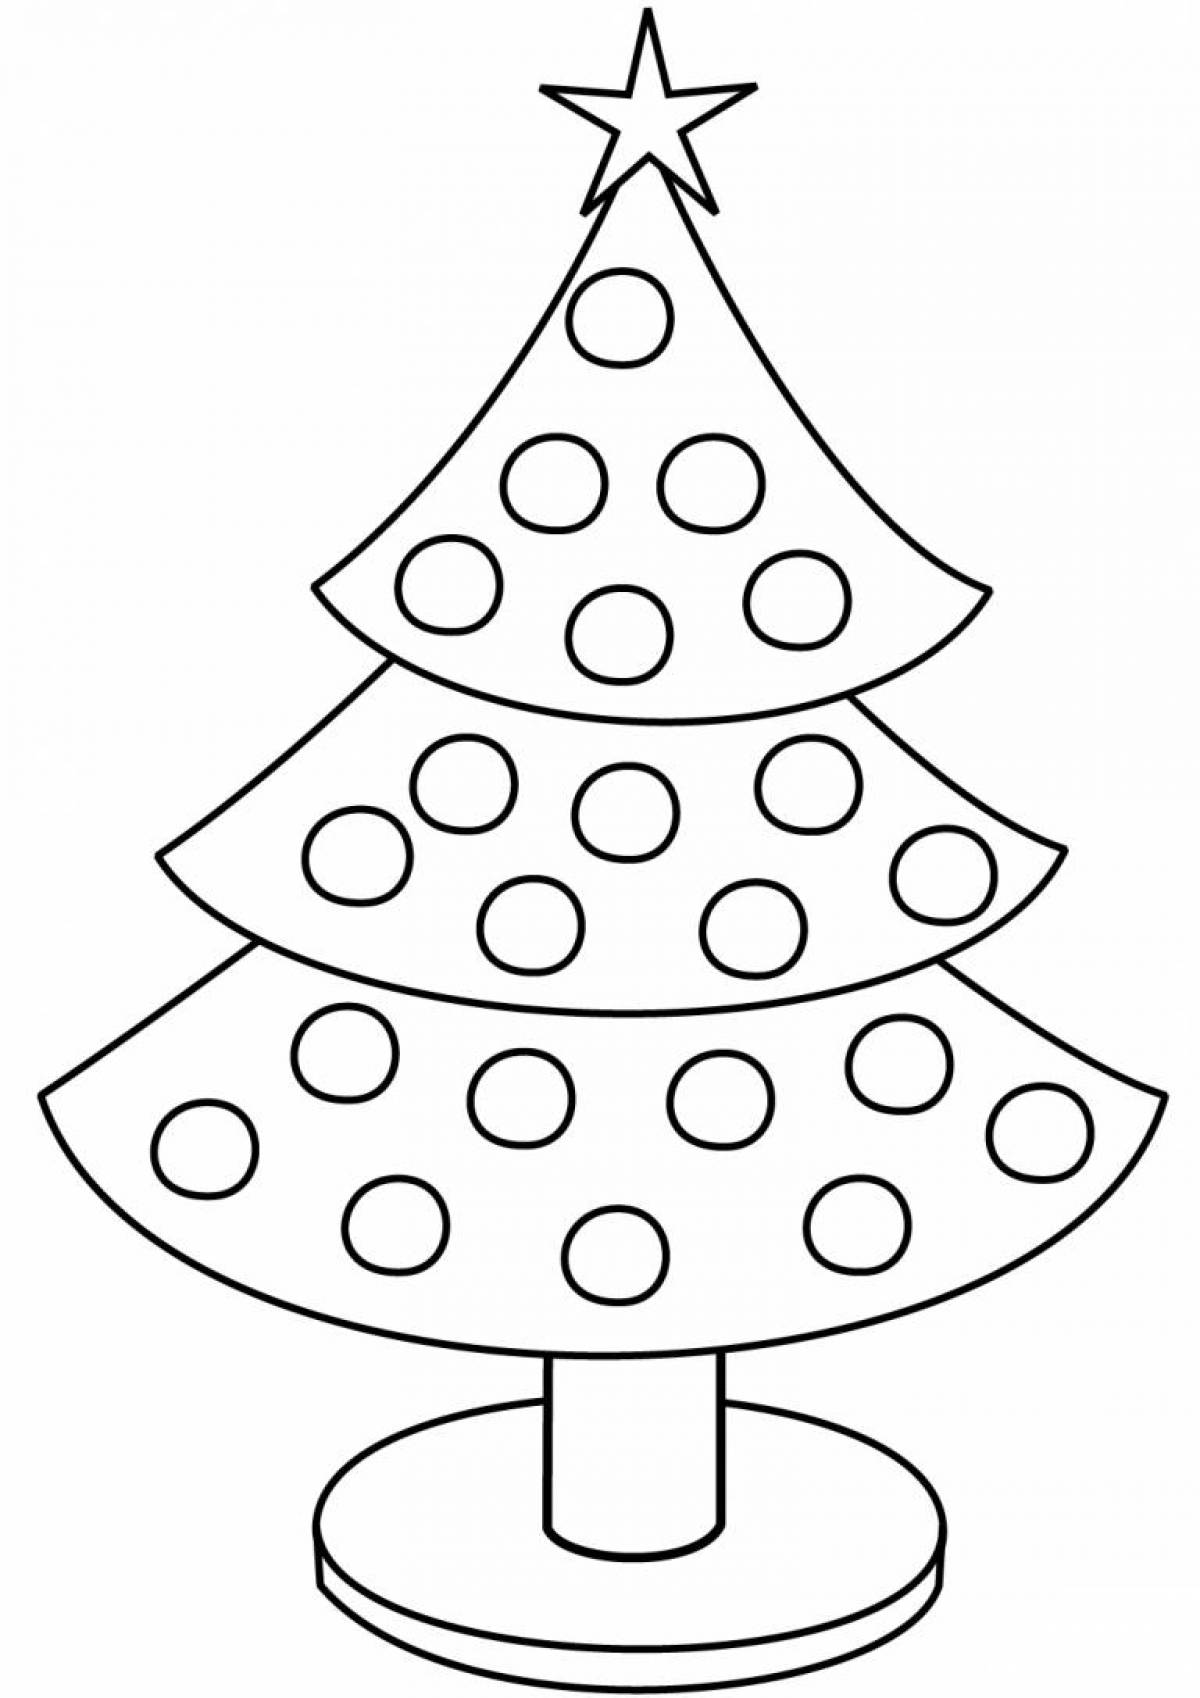 Amazing christmas tree coloring page